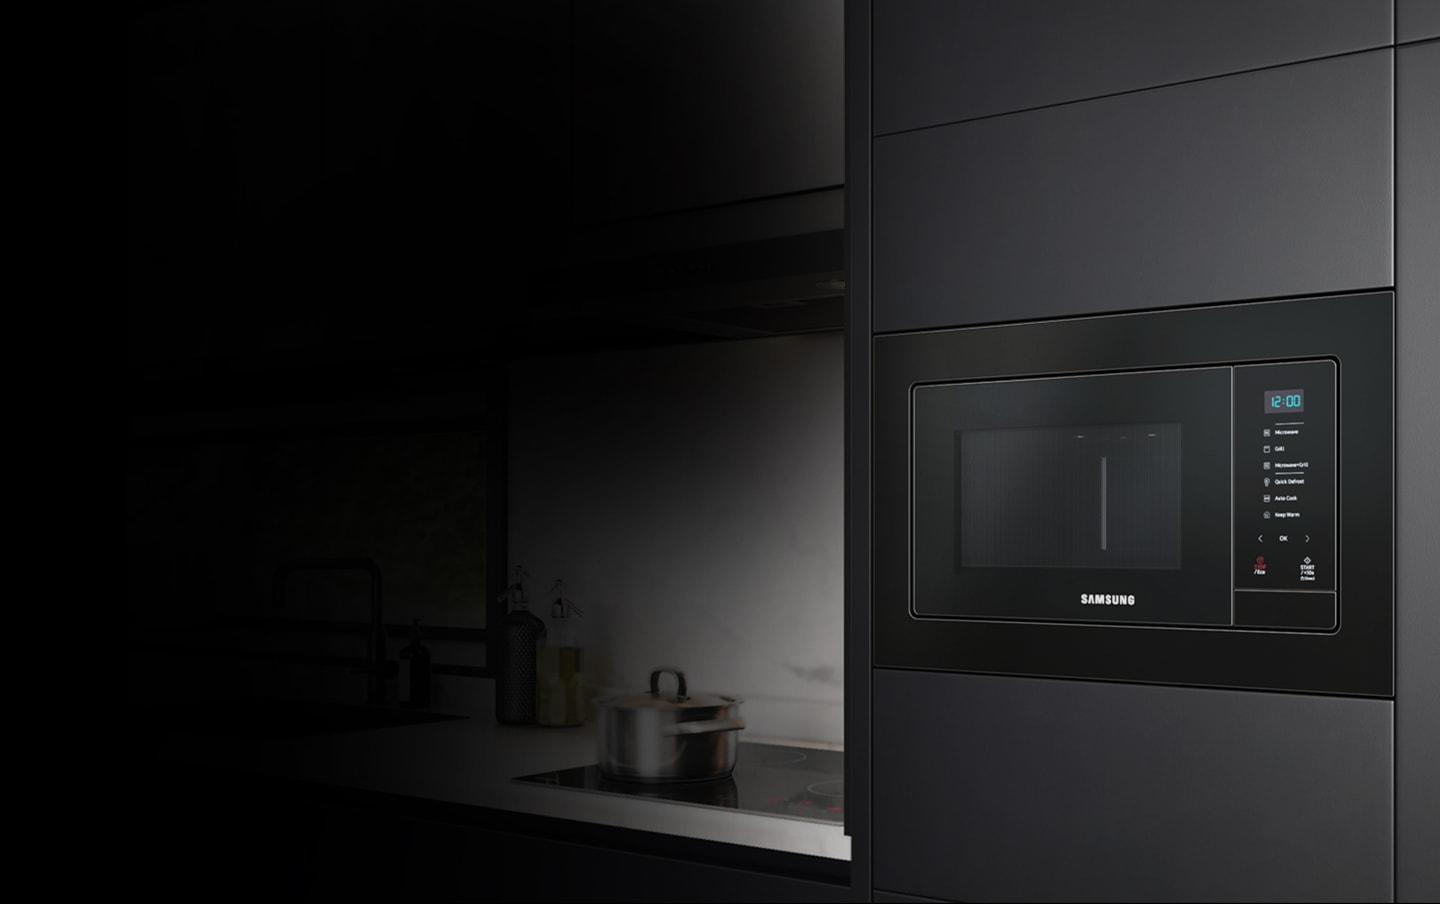 Shows how the elegant styling of the microwave oven fits seamlessly into a modern kitchen.